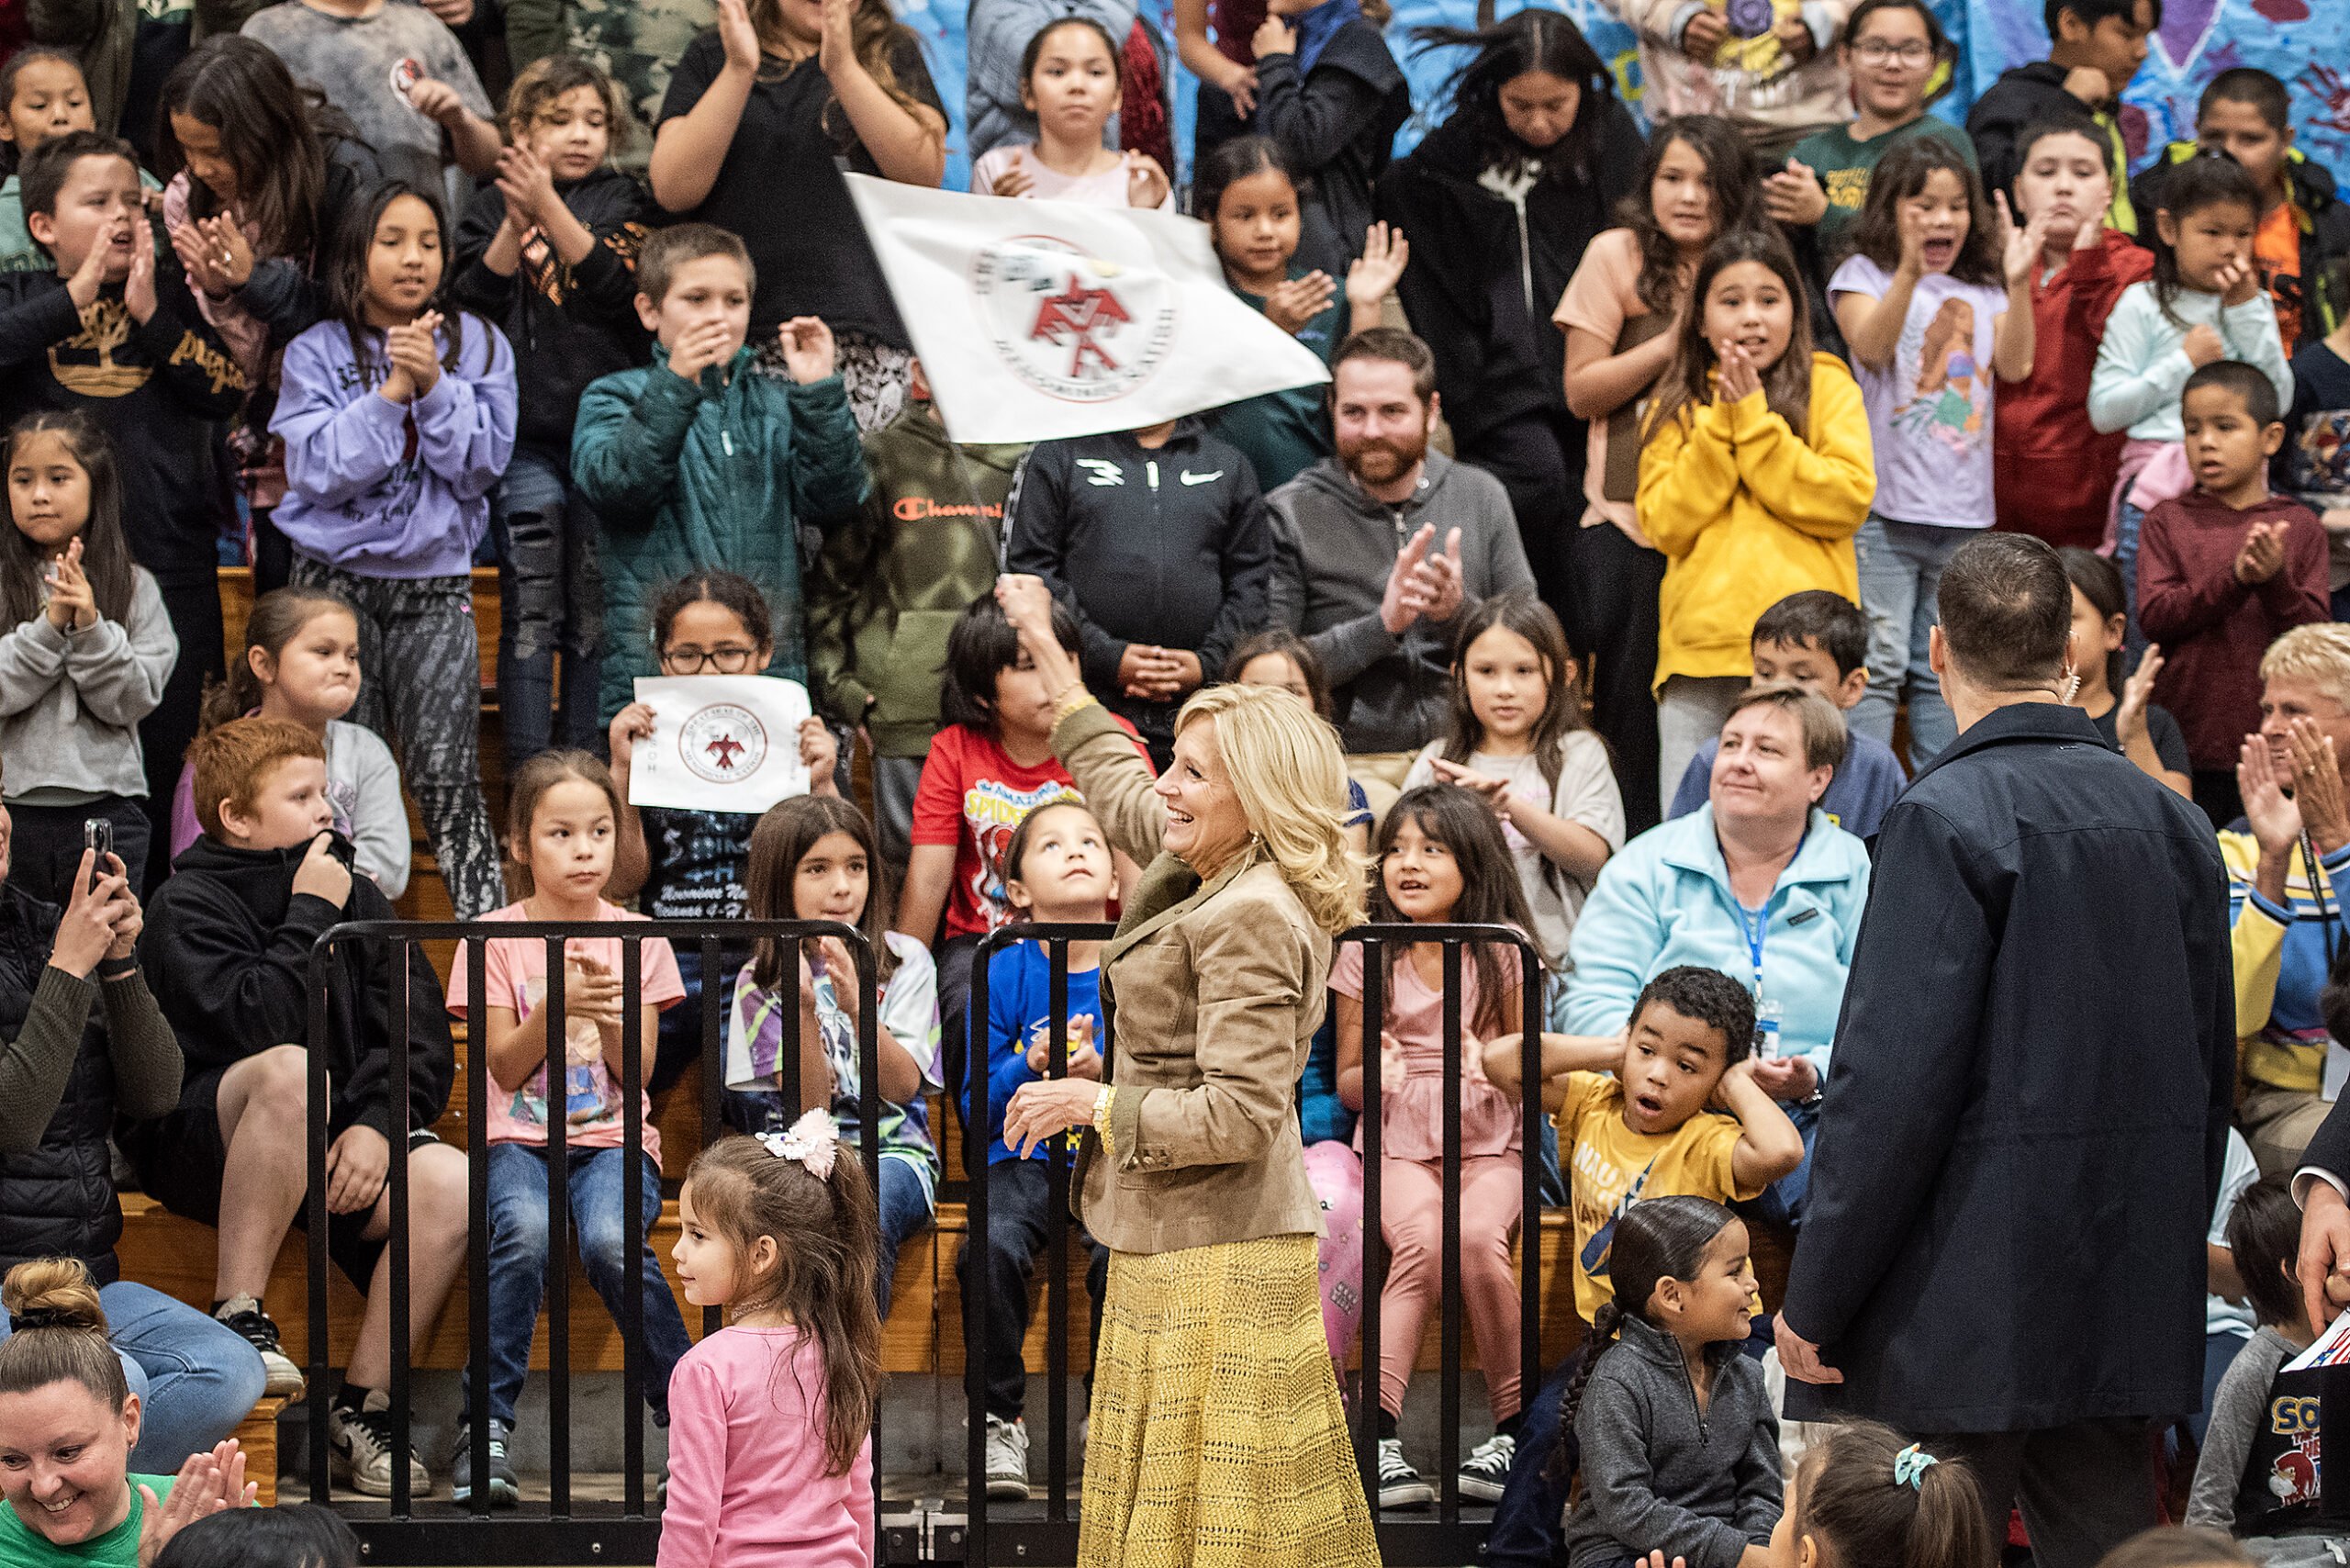 Students watch and cheer as Jill Biden waves a white flag with a seal on it.